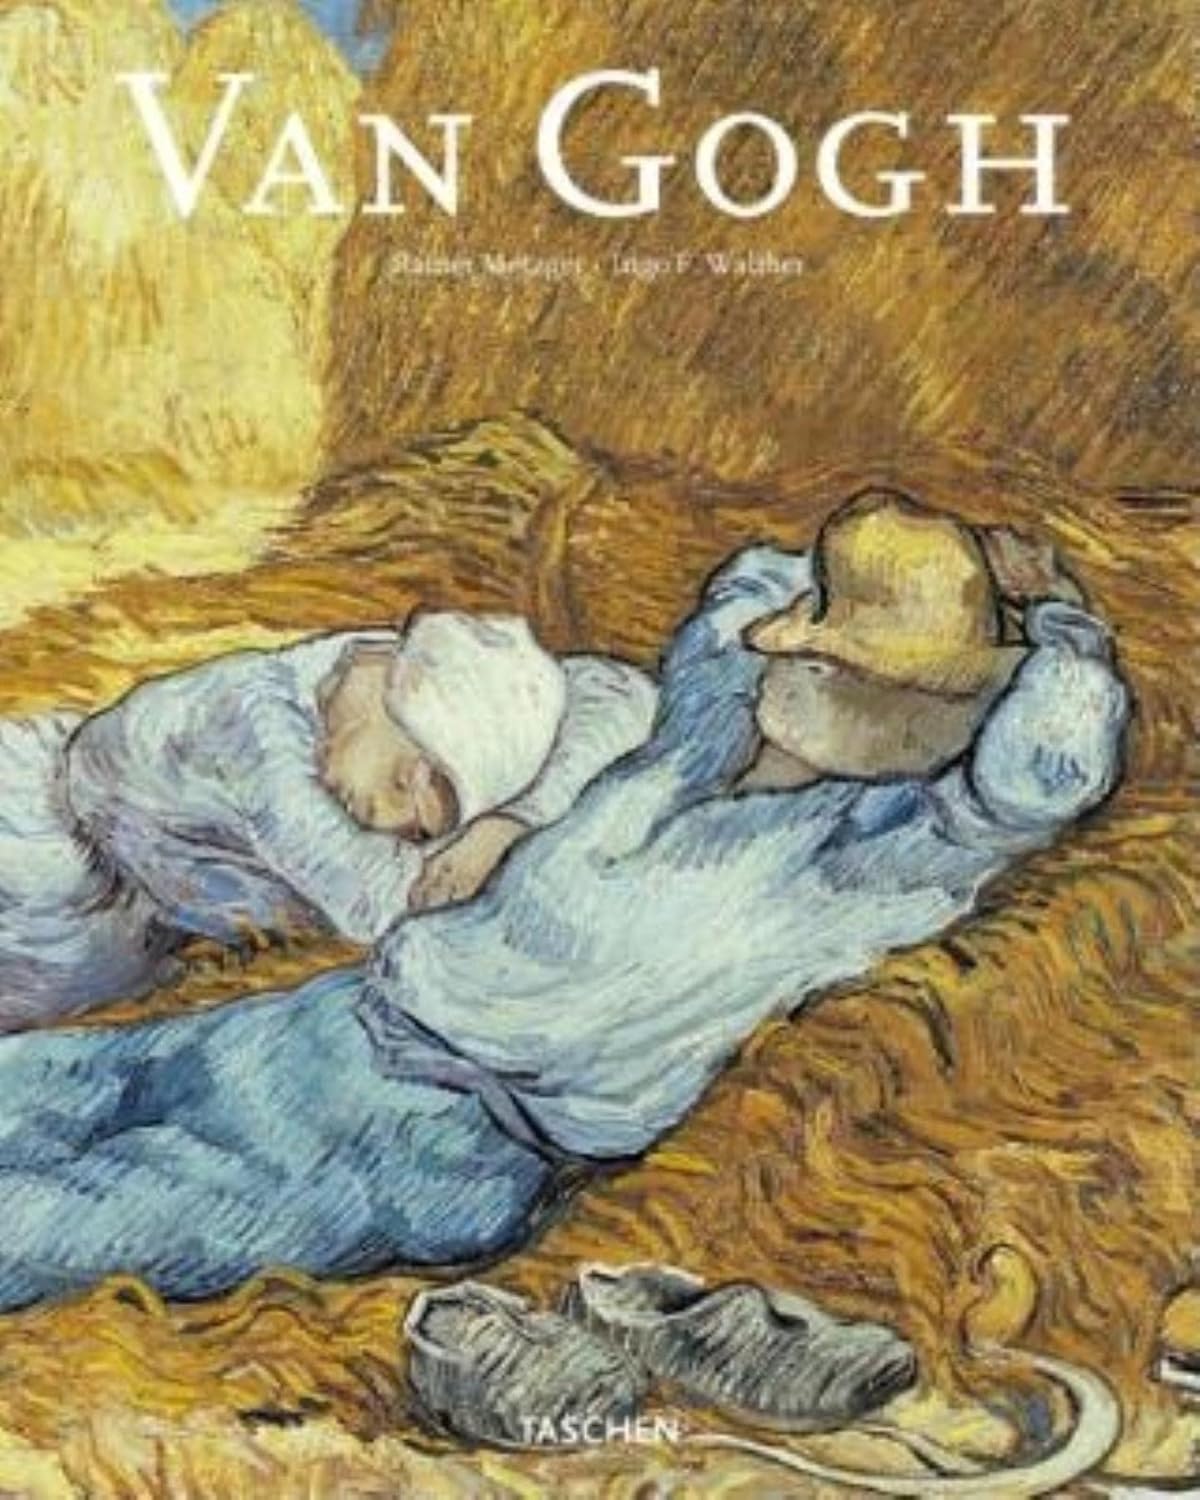 Vincent Van Gogh: The Complete Paintings by Ingo F. Walther and Rainer Metzger